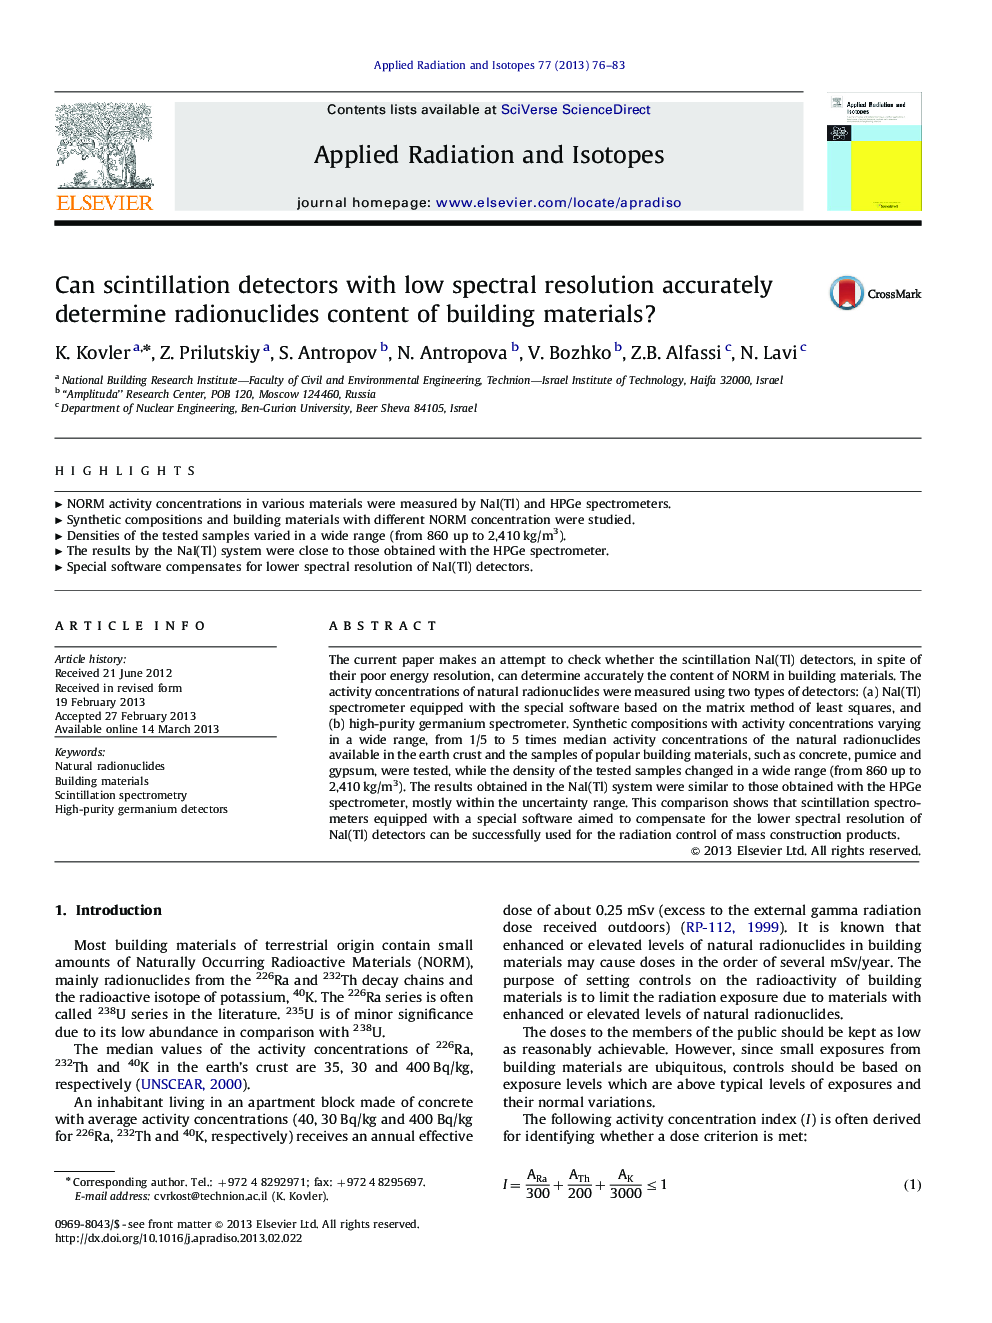 Can scintillation detectors with low spectral resolution accurately determine radionuclides content of building materials?